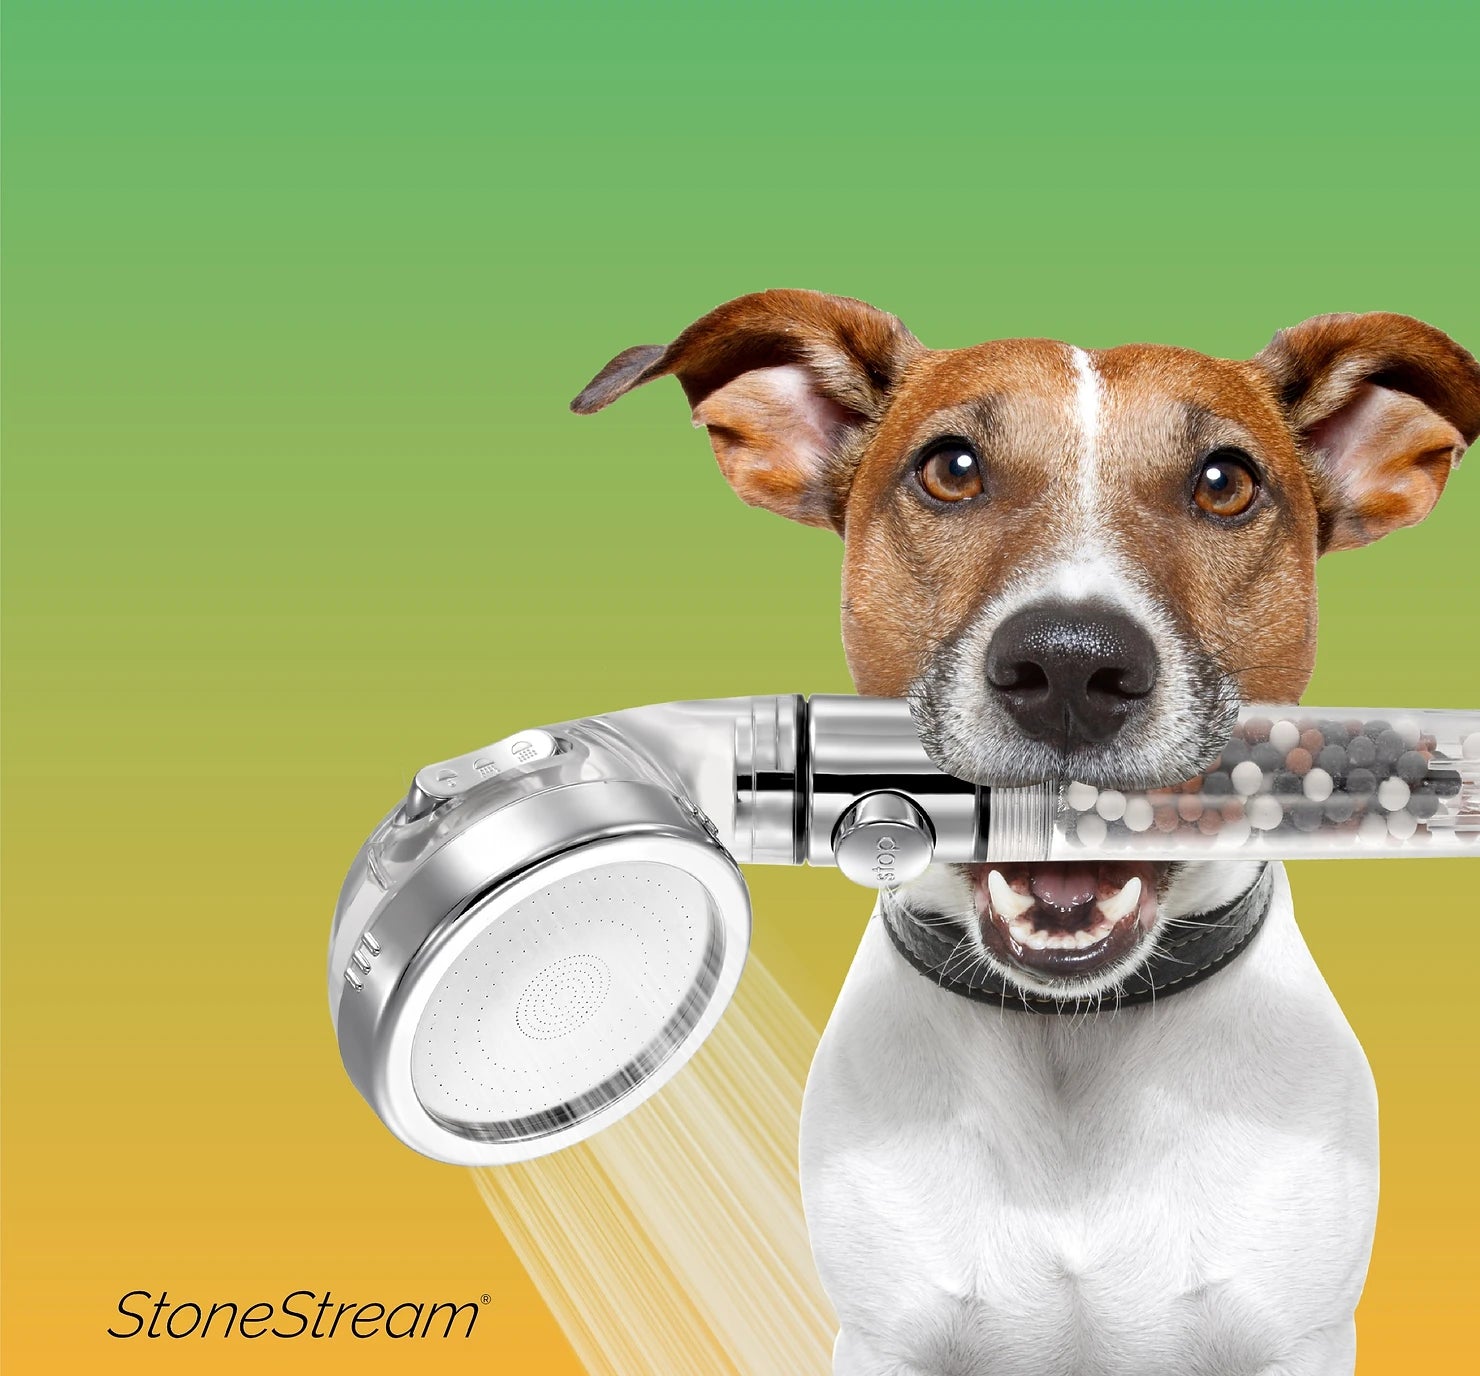 How To Choose the Best Shower Head for Dogs